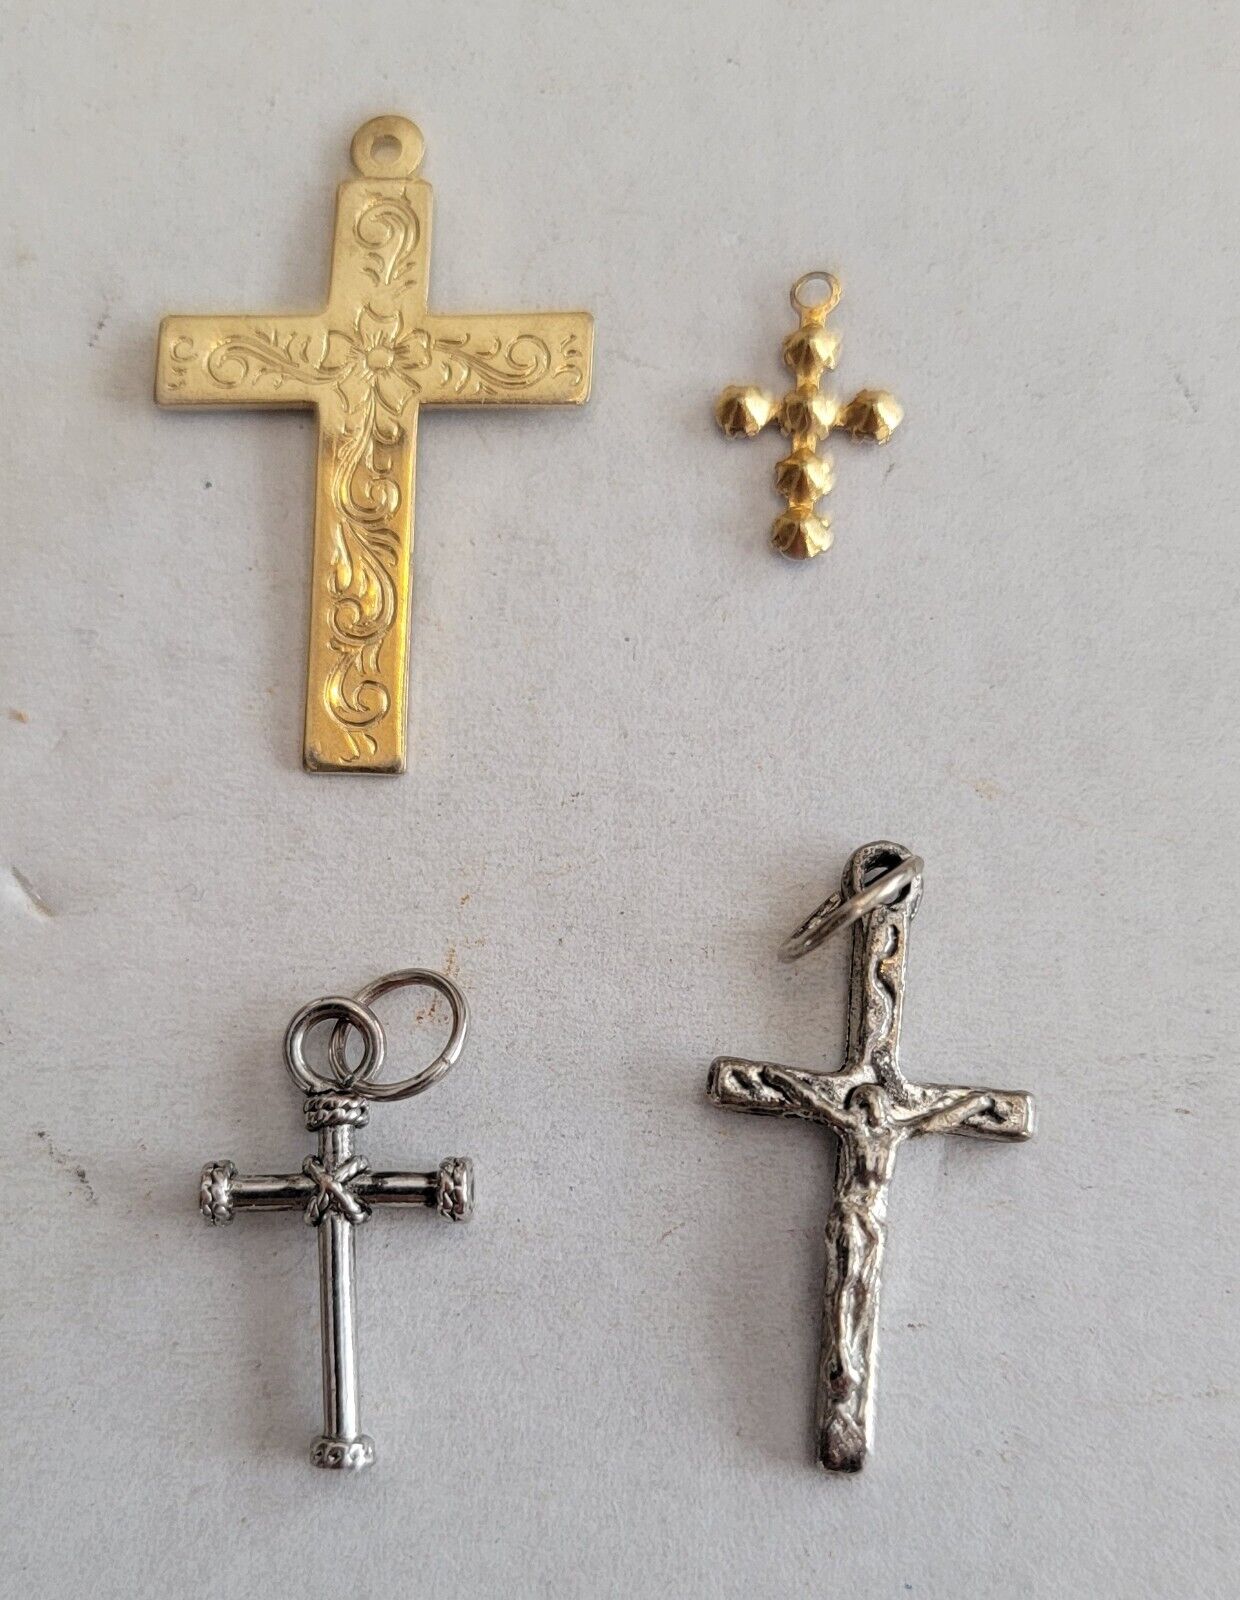 Lot of 4 Cross Religious Pendants for Necklace